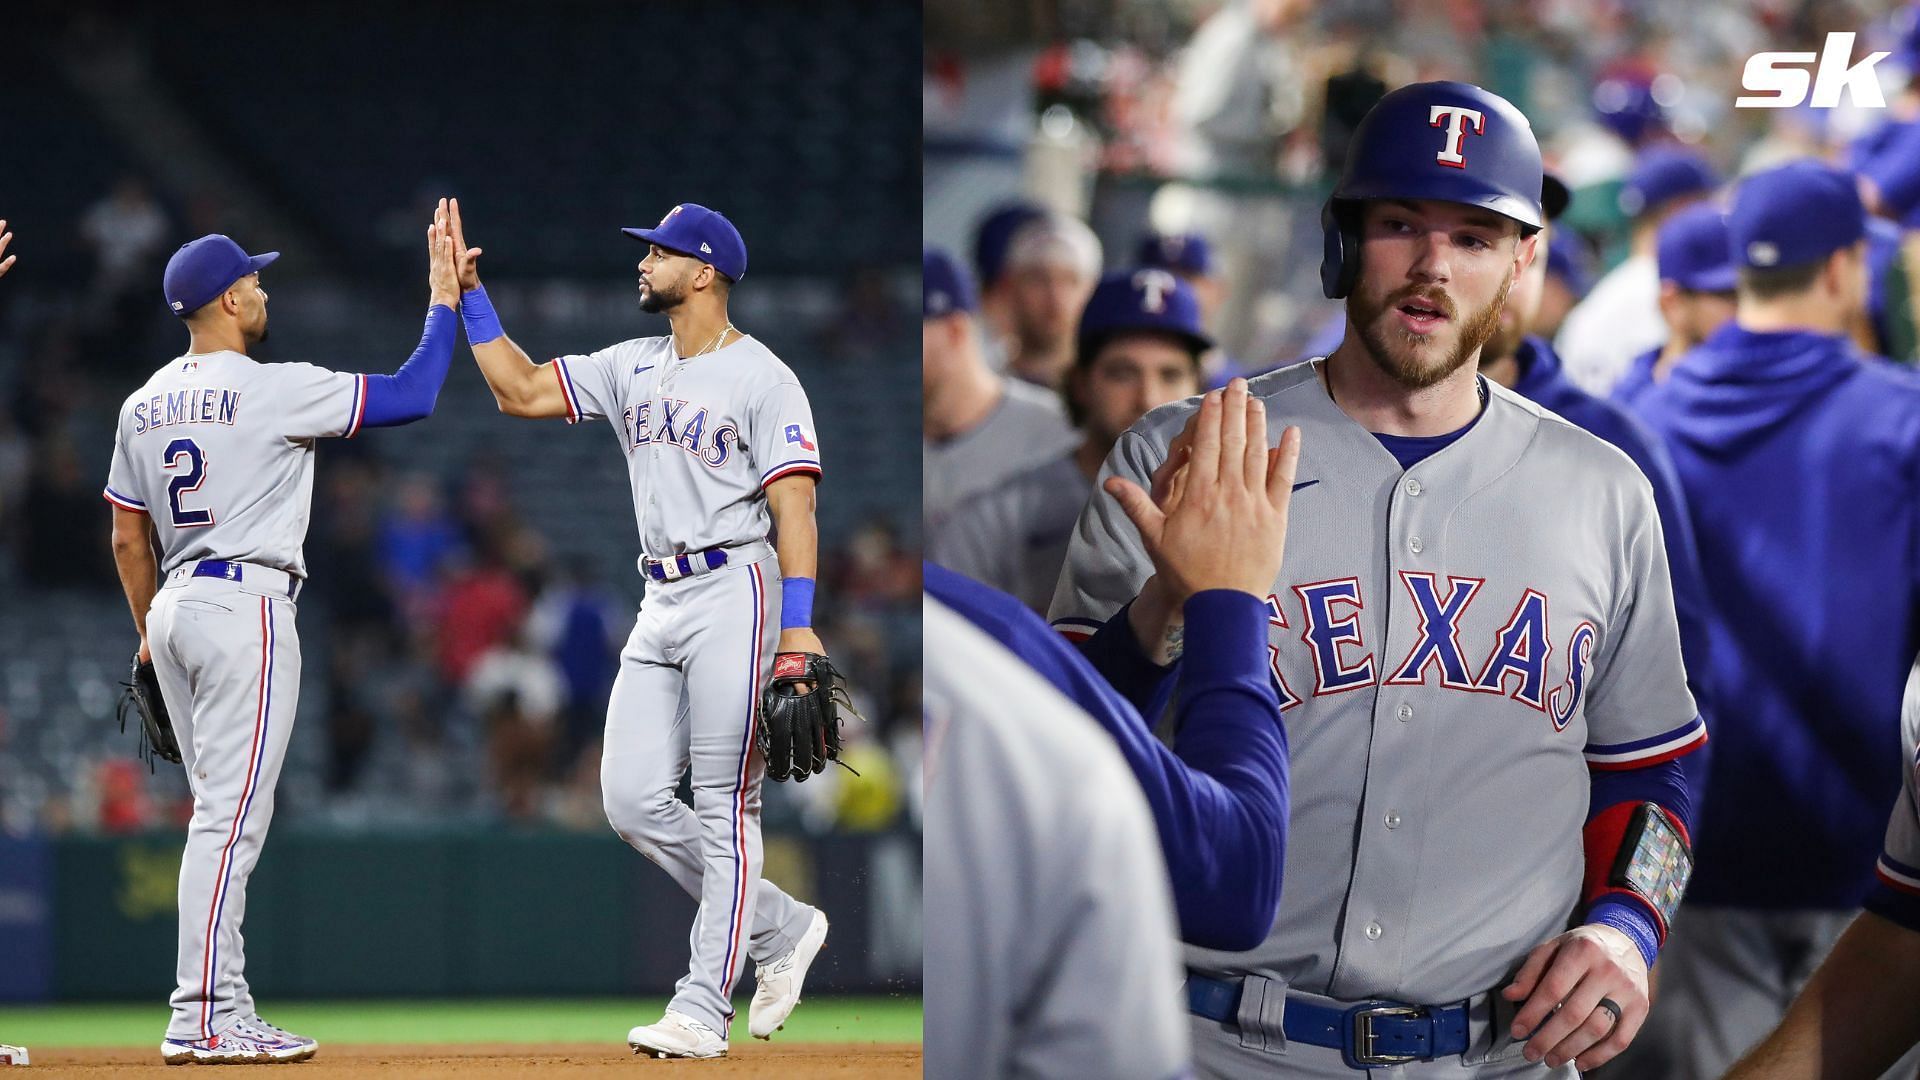 The Texas Rangers look poised for a serious run